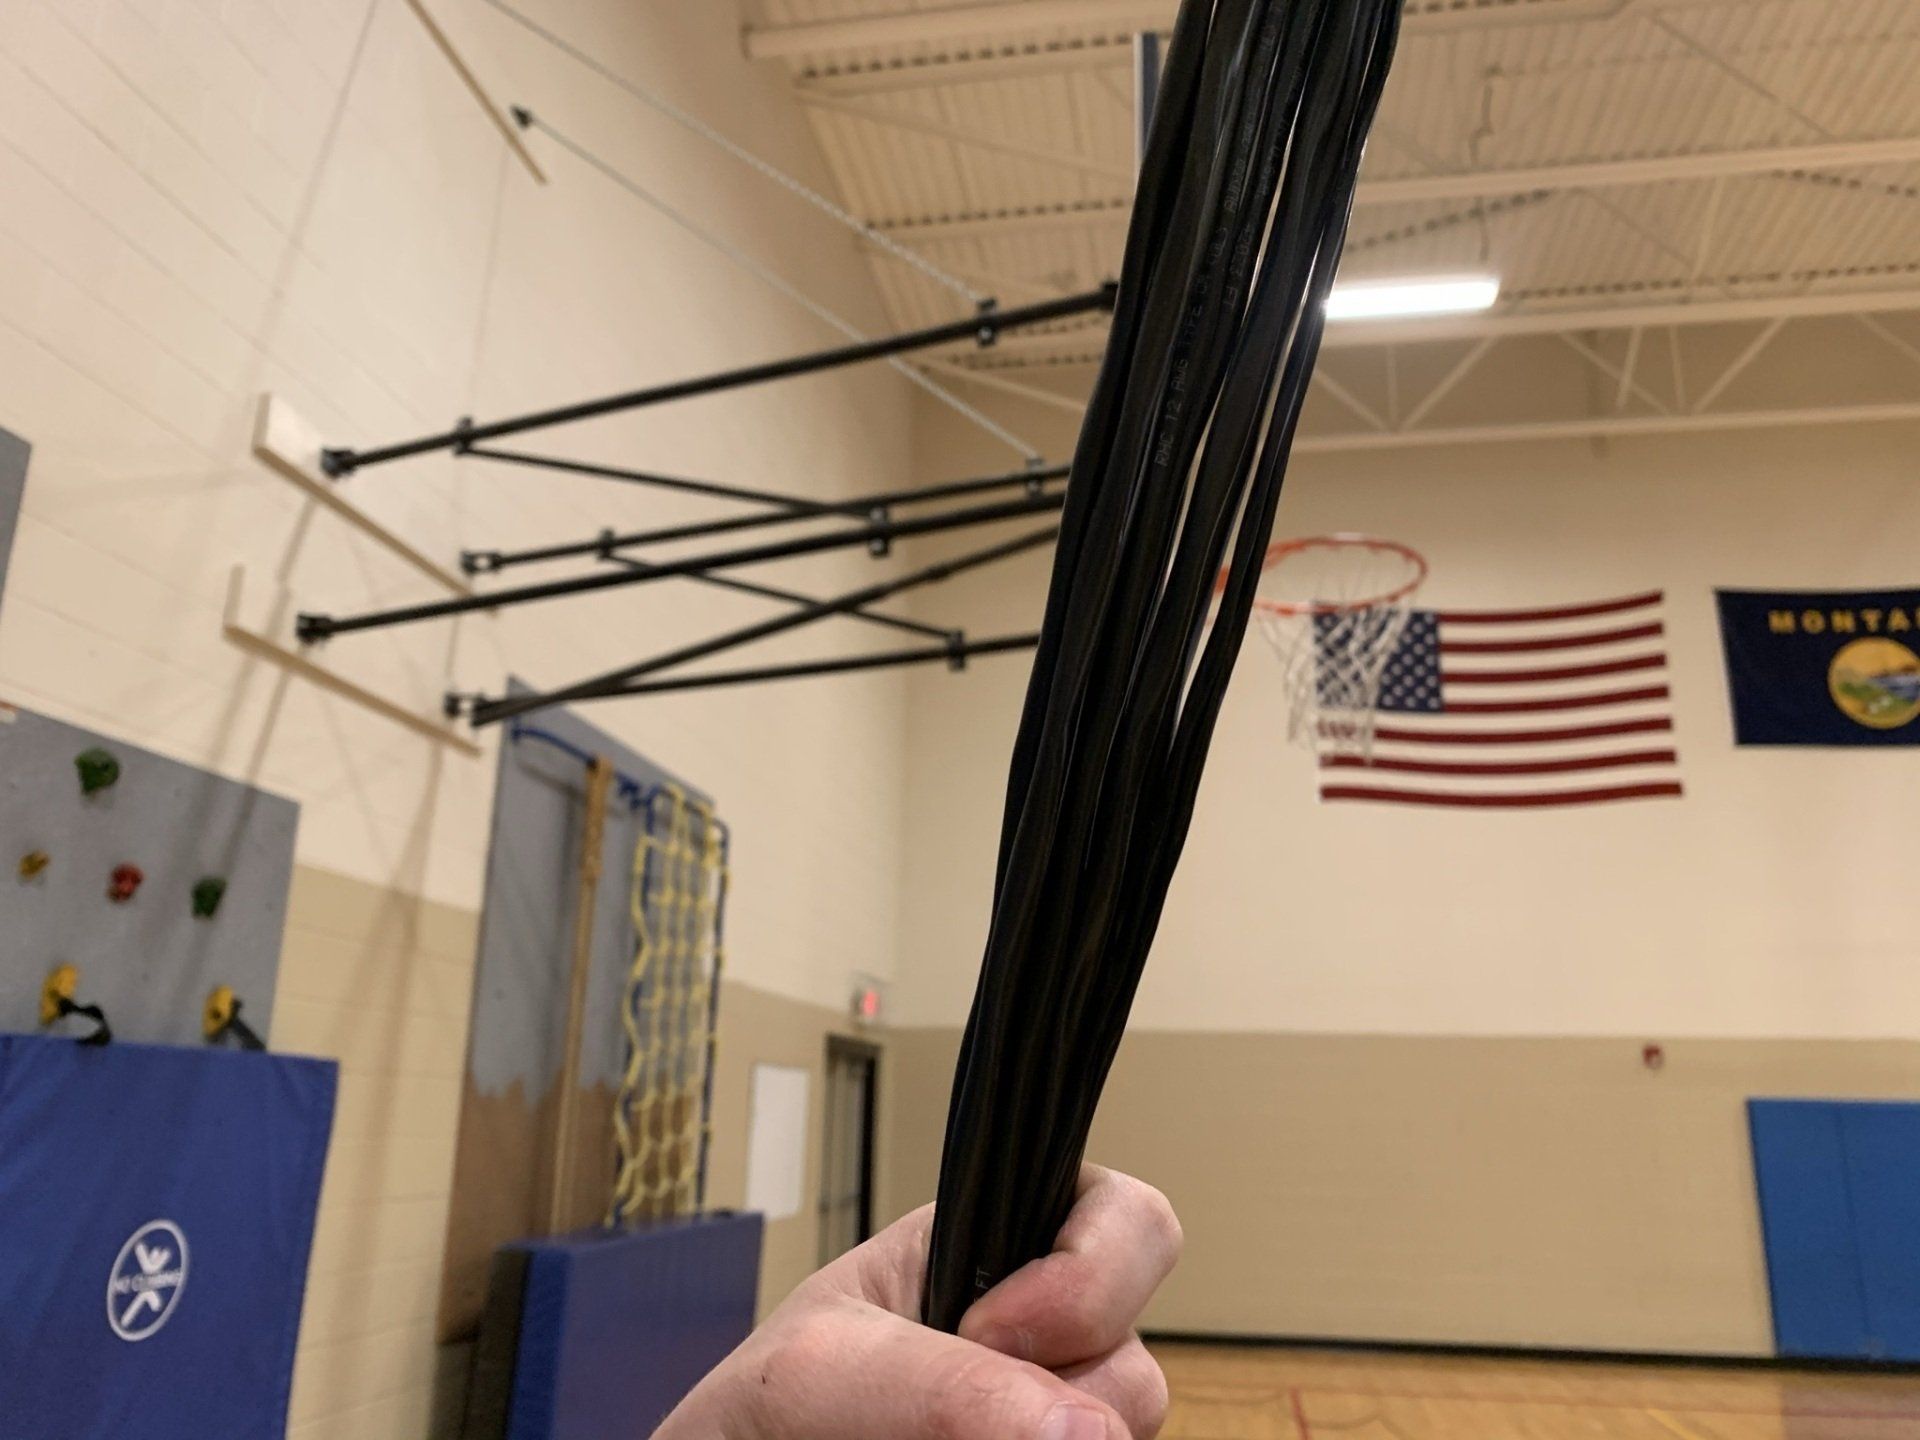 A person is holding a bundle of cables in a gym